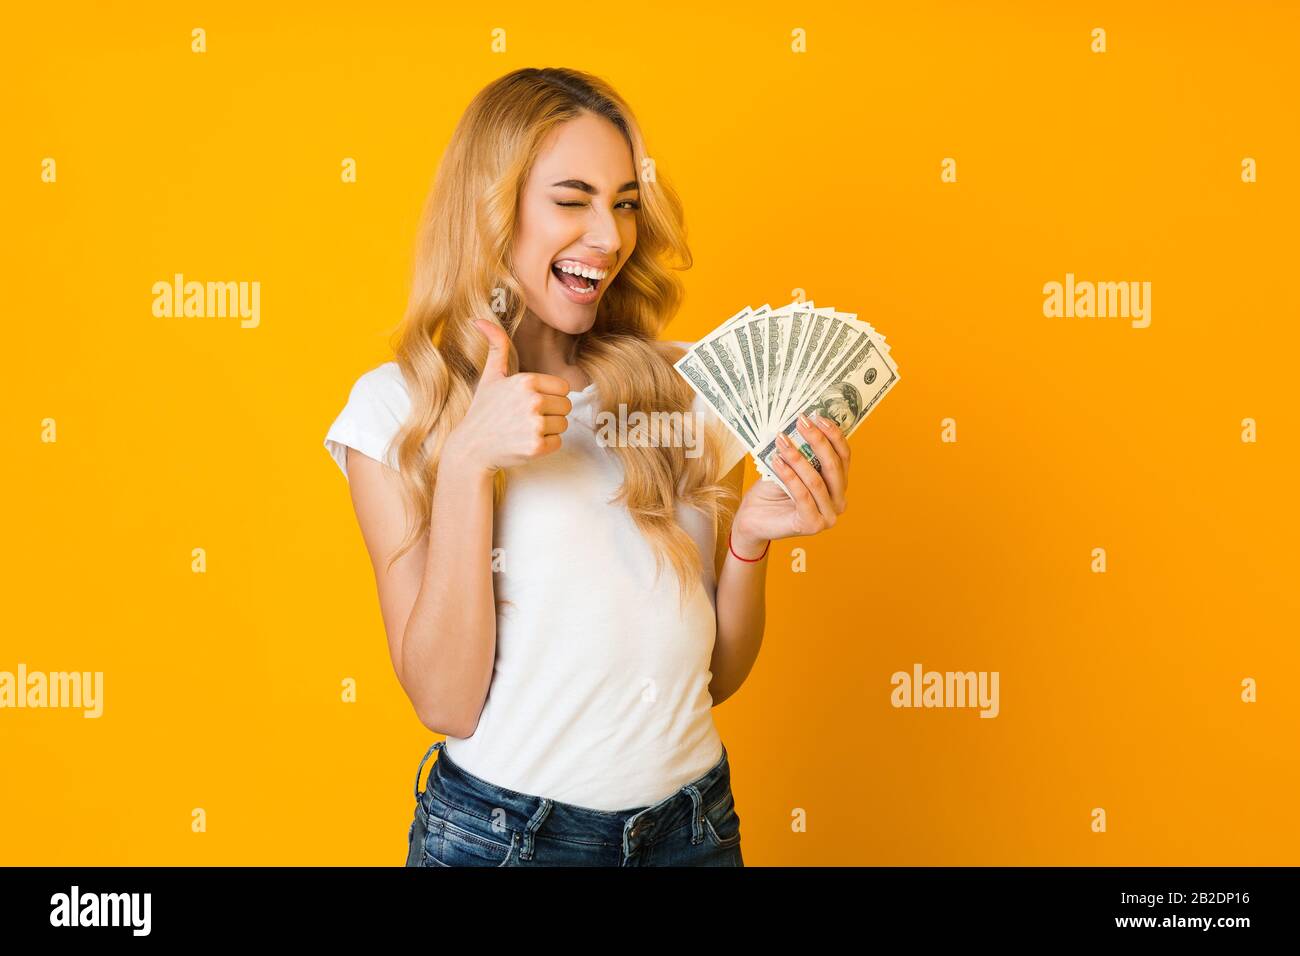 Cashback. Excited woman holding money banknotes and showing thumb up Stock Photo